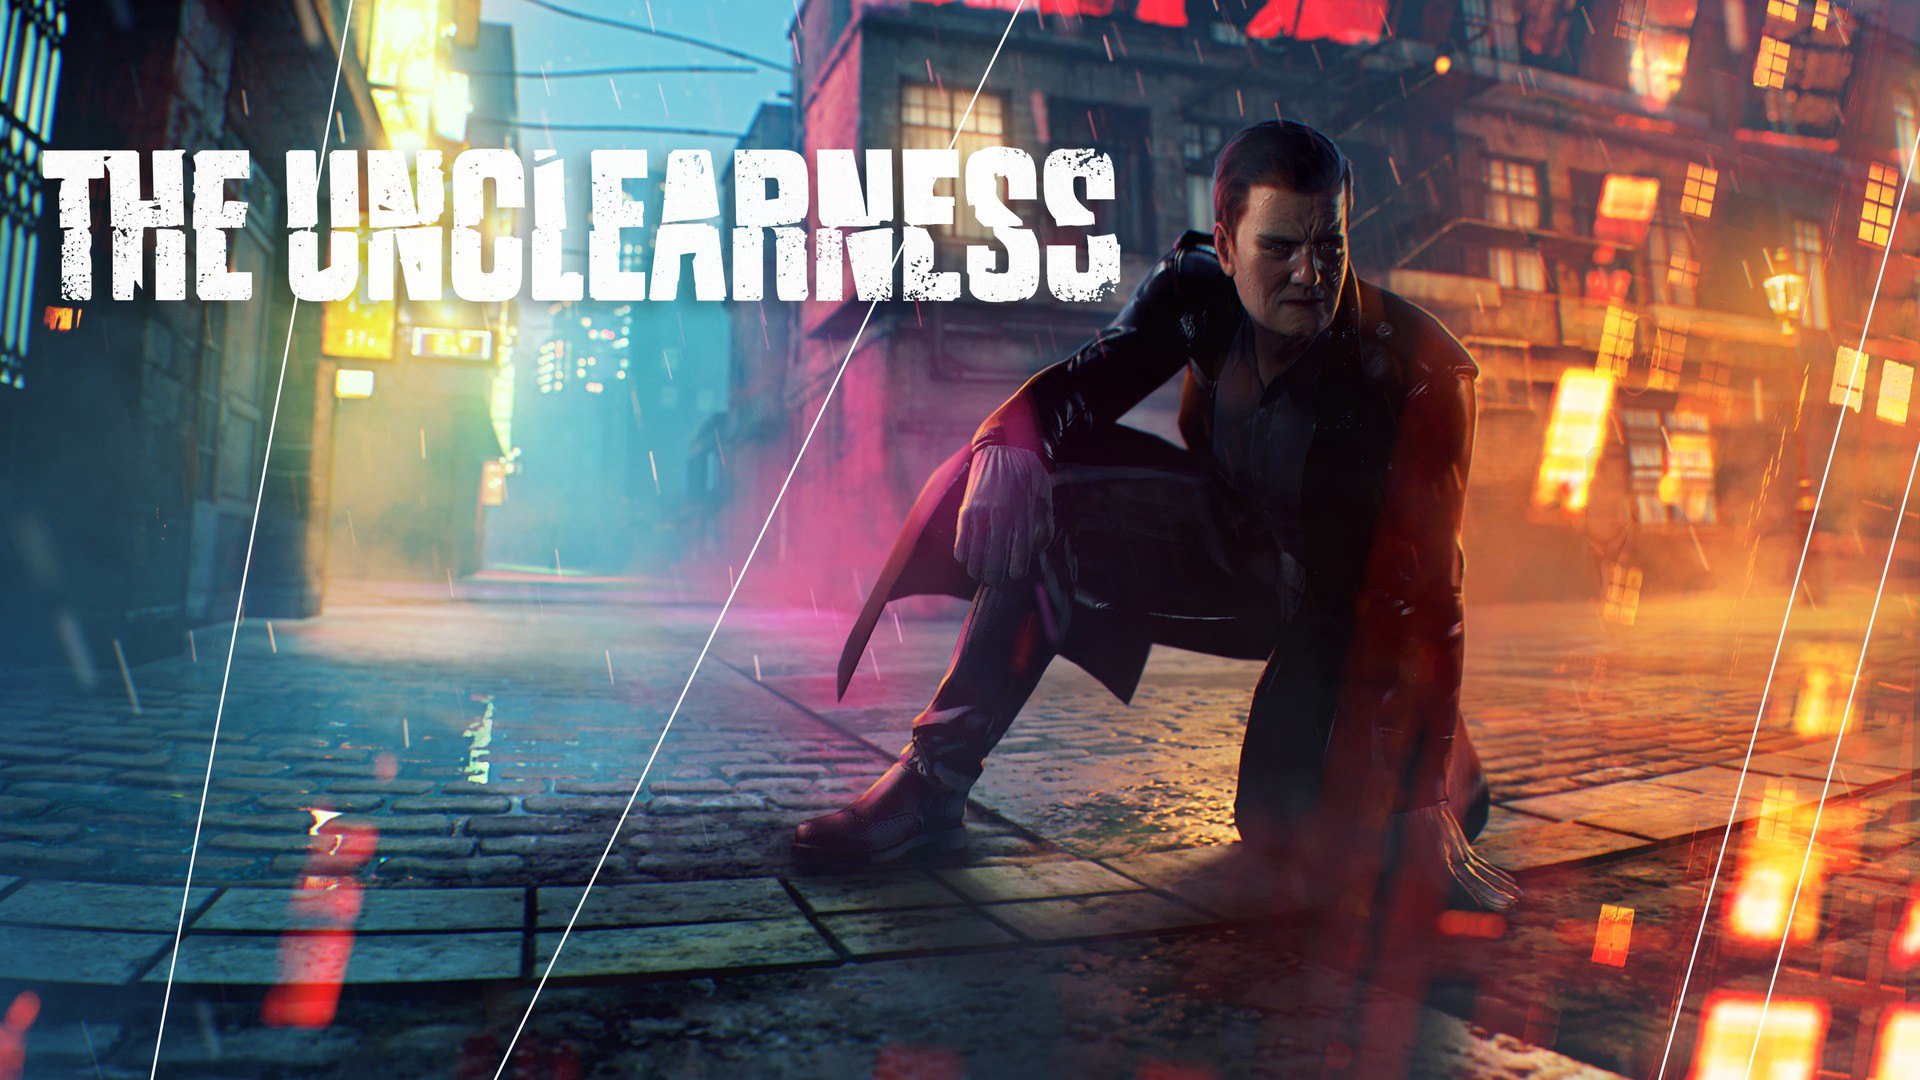 THE UNCLEARNESS Steam CD Key 6.77$